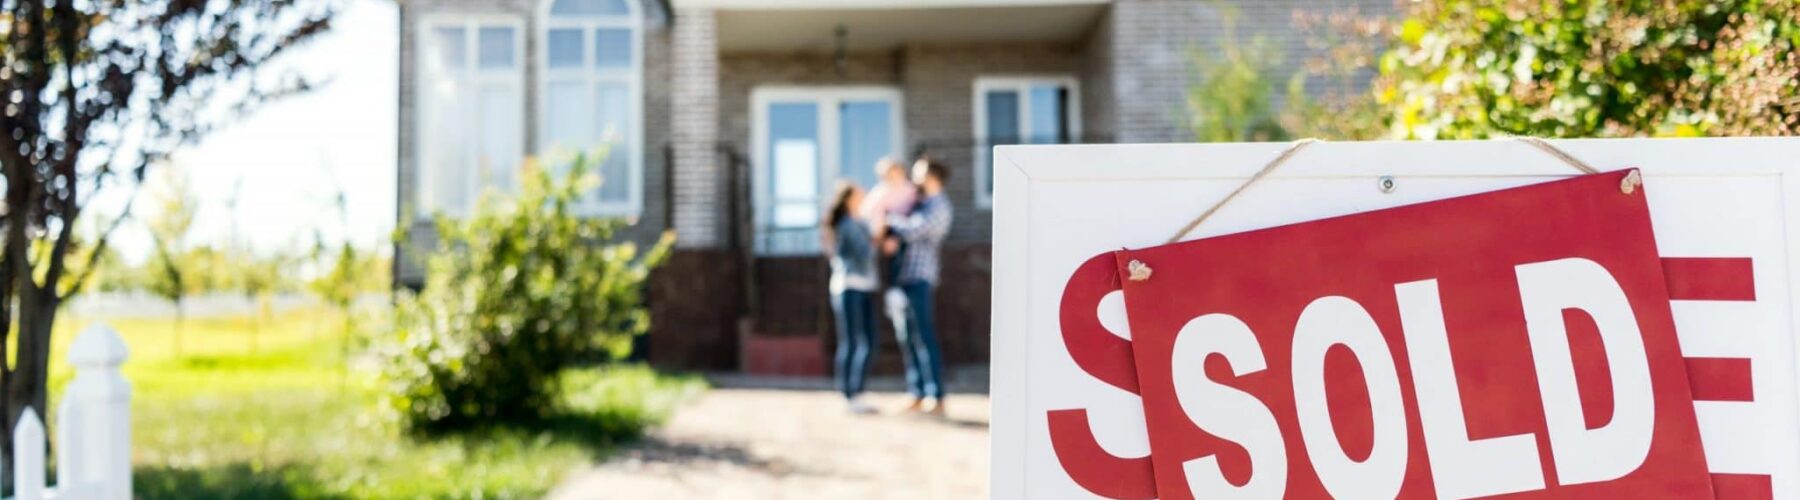 How to Sell Your Home for Cash in a Fast and Hassle-Free Way